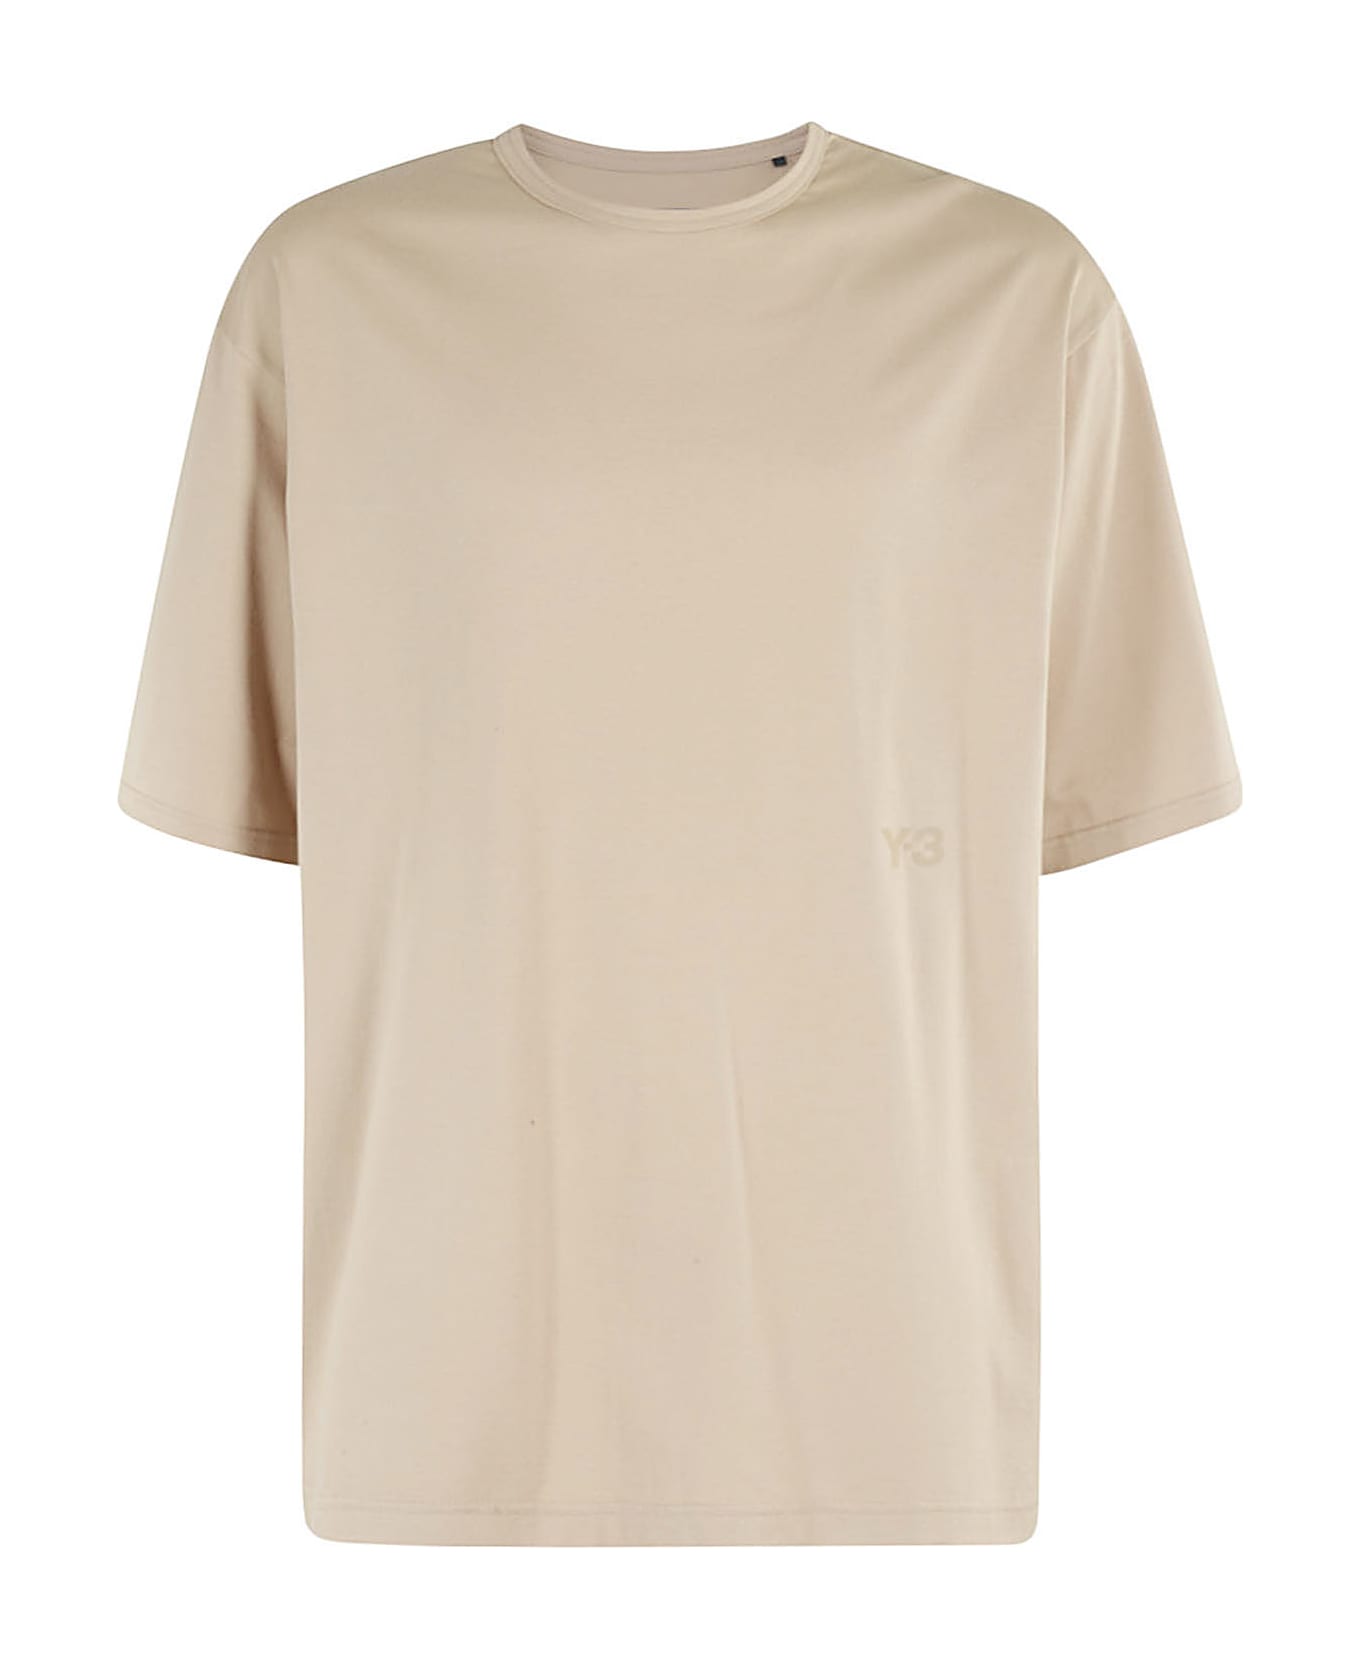 Y-3 Boxy Tee - Brown シャツ